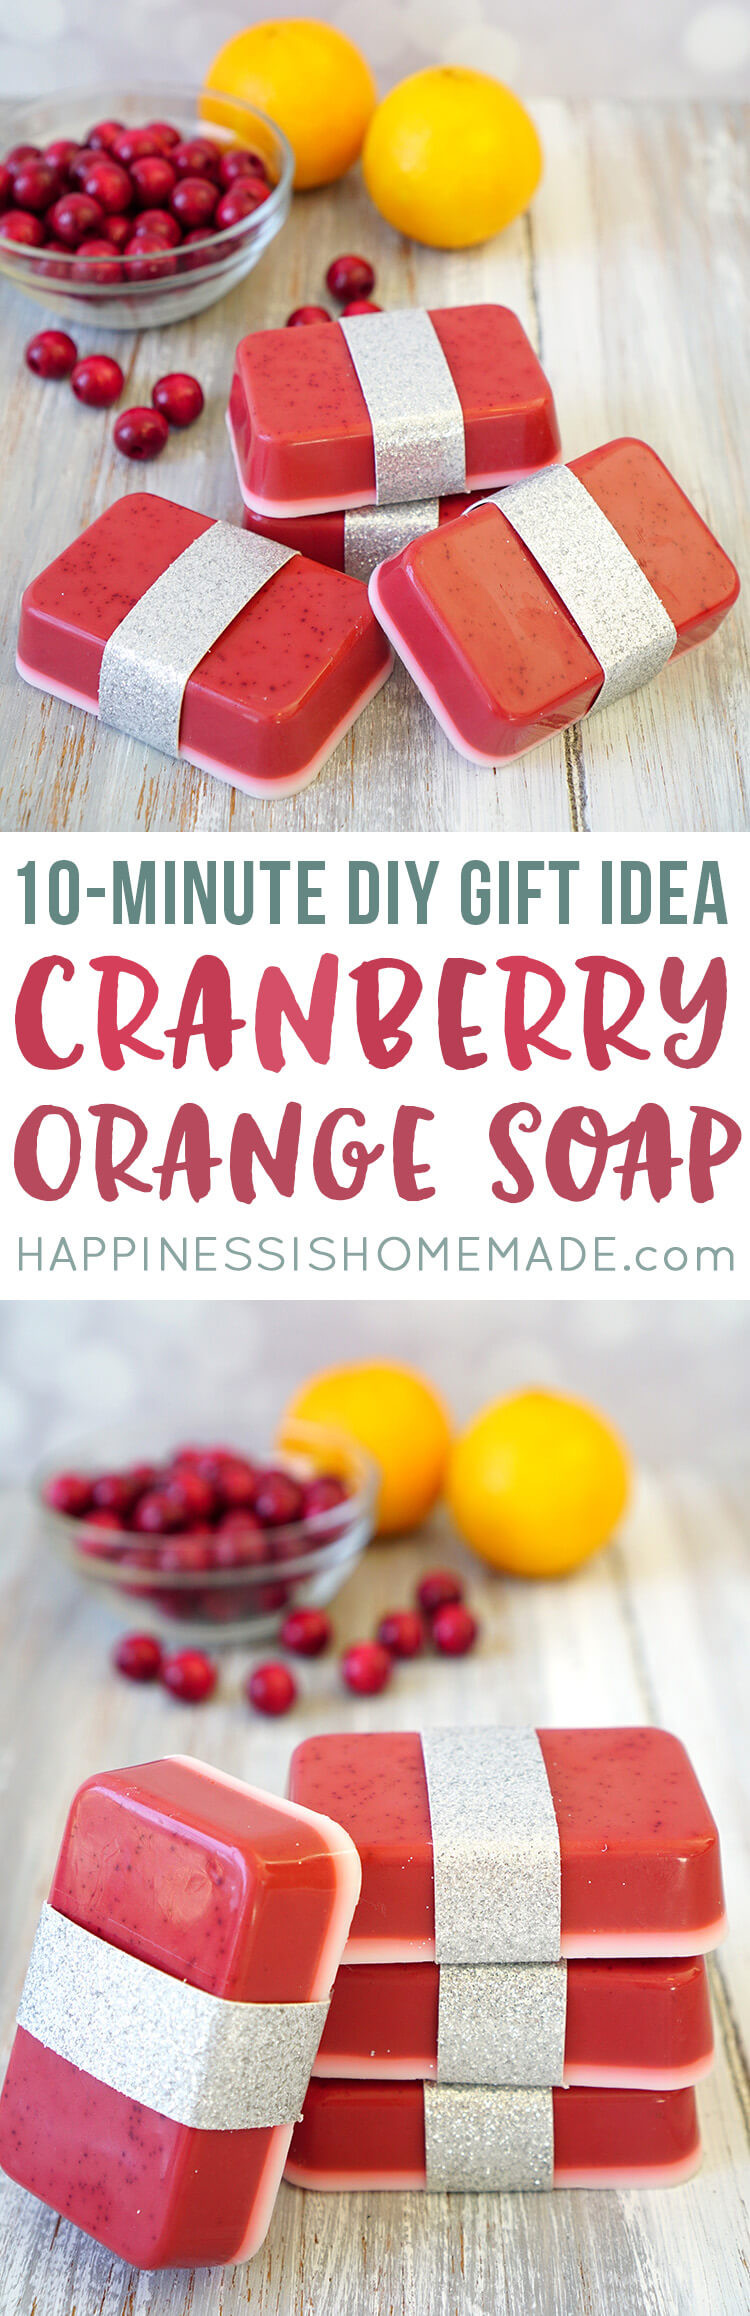 Cool DIY Christmas Gifts
 10 Minute DIY Cranberry Orange Soap Happiness is Homemade